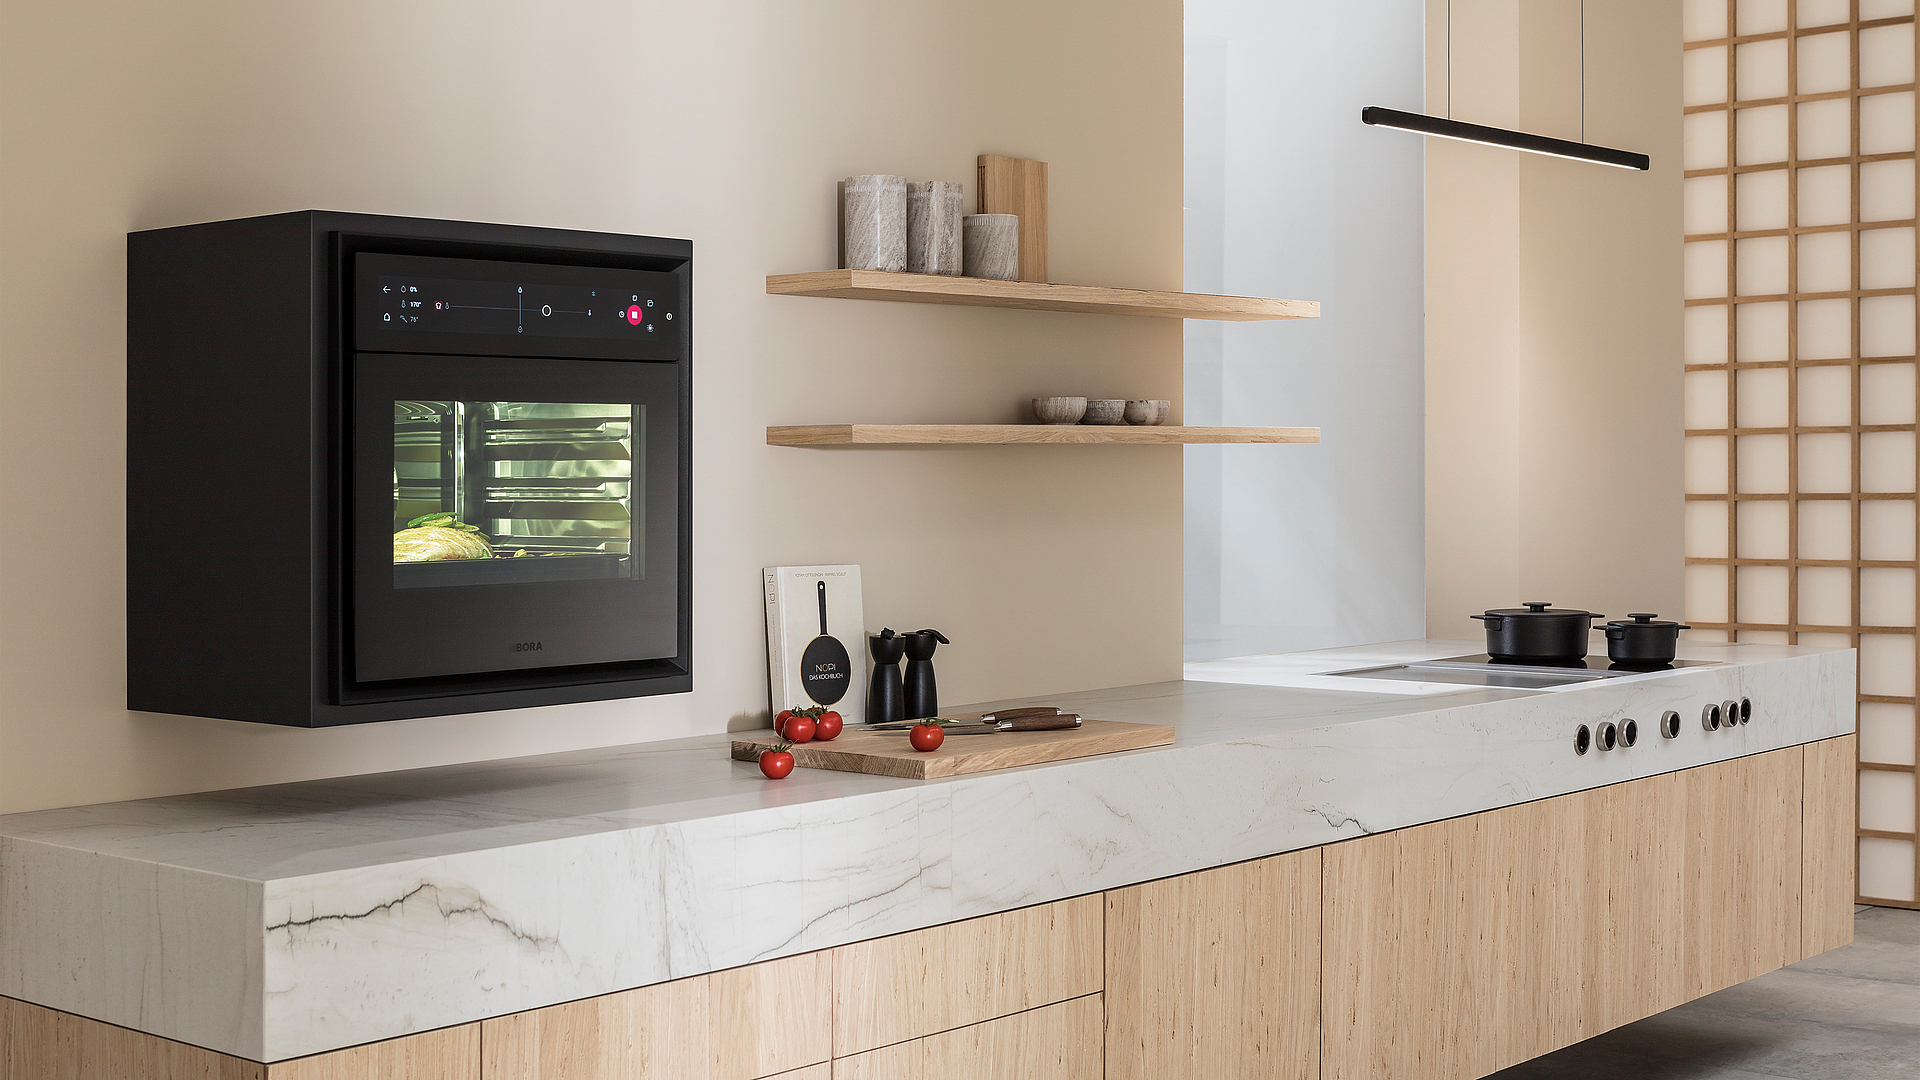 BORA X BO – the flex oven: the new comfort of cooking